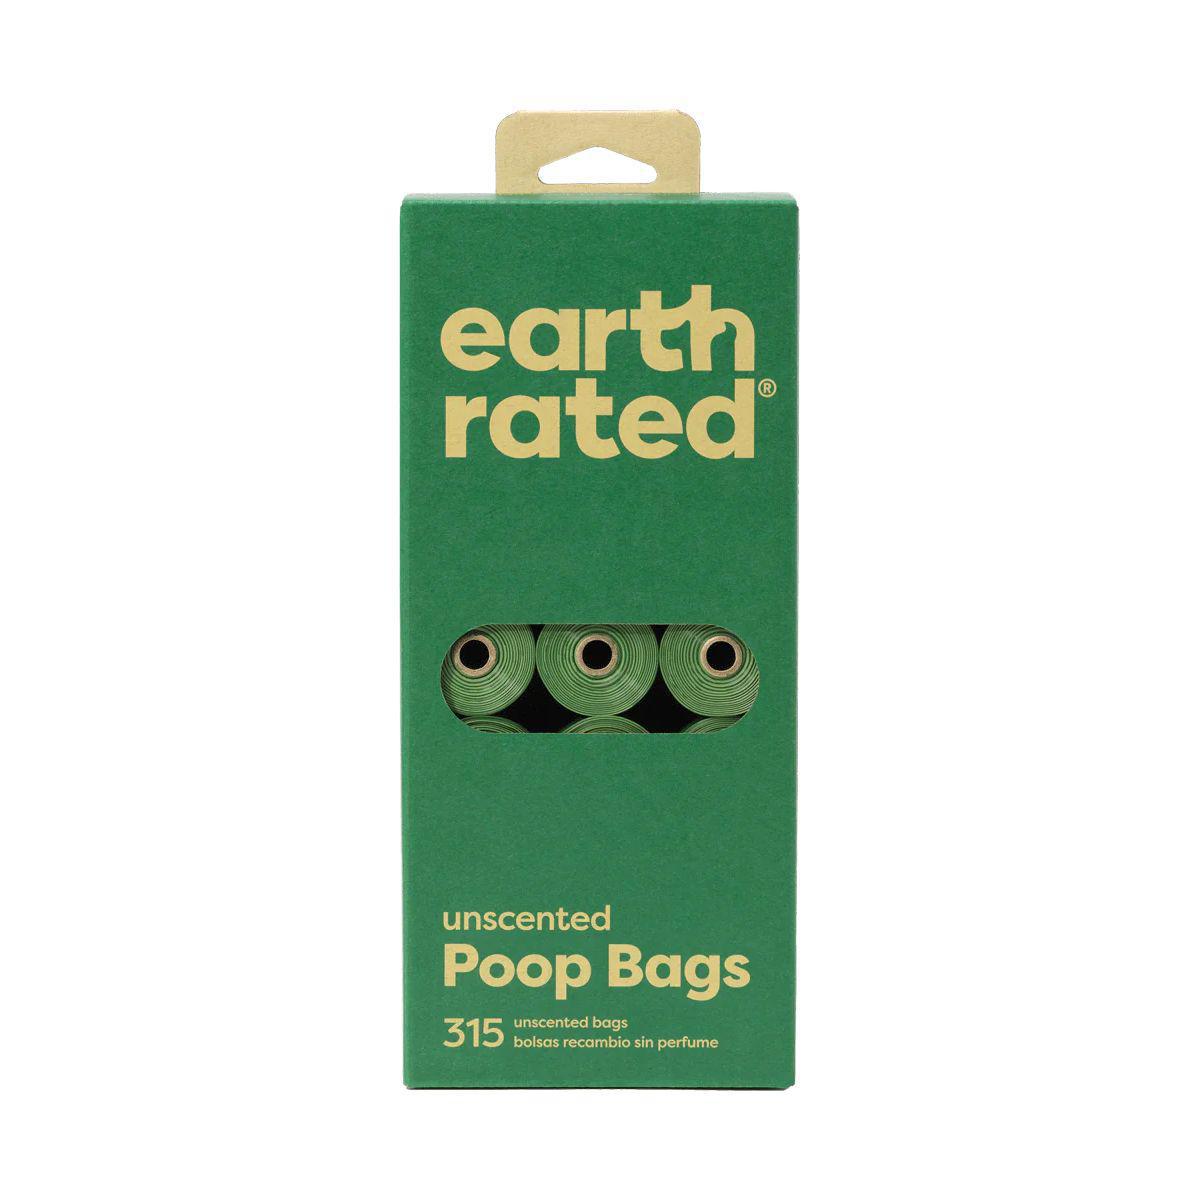 Earth Rated - 21Rolls 315 Bags Unscented Poop Bags - AARCS DONATION ONLY